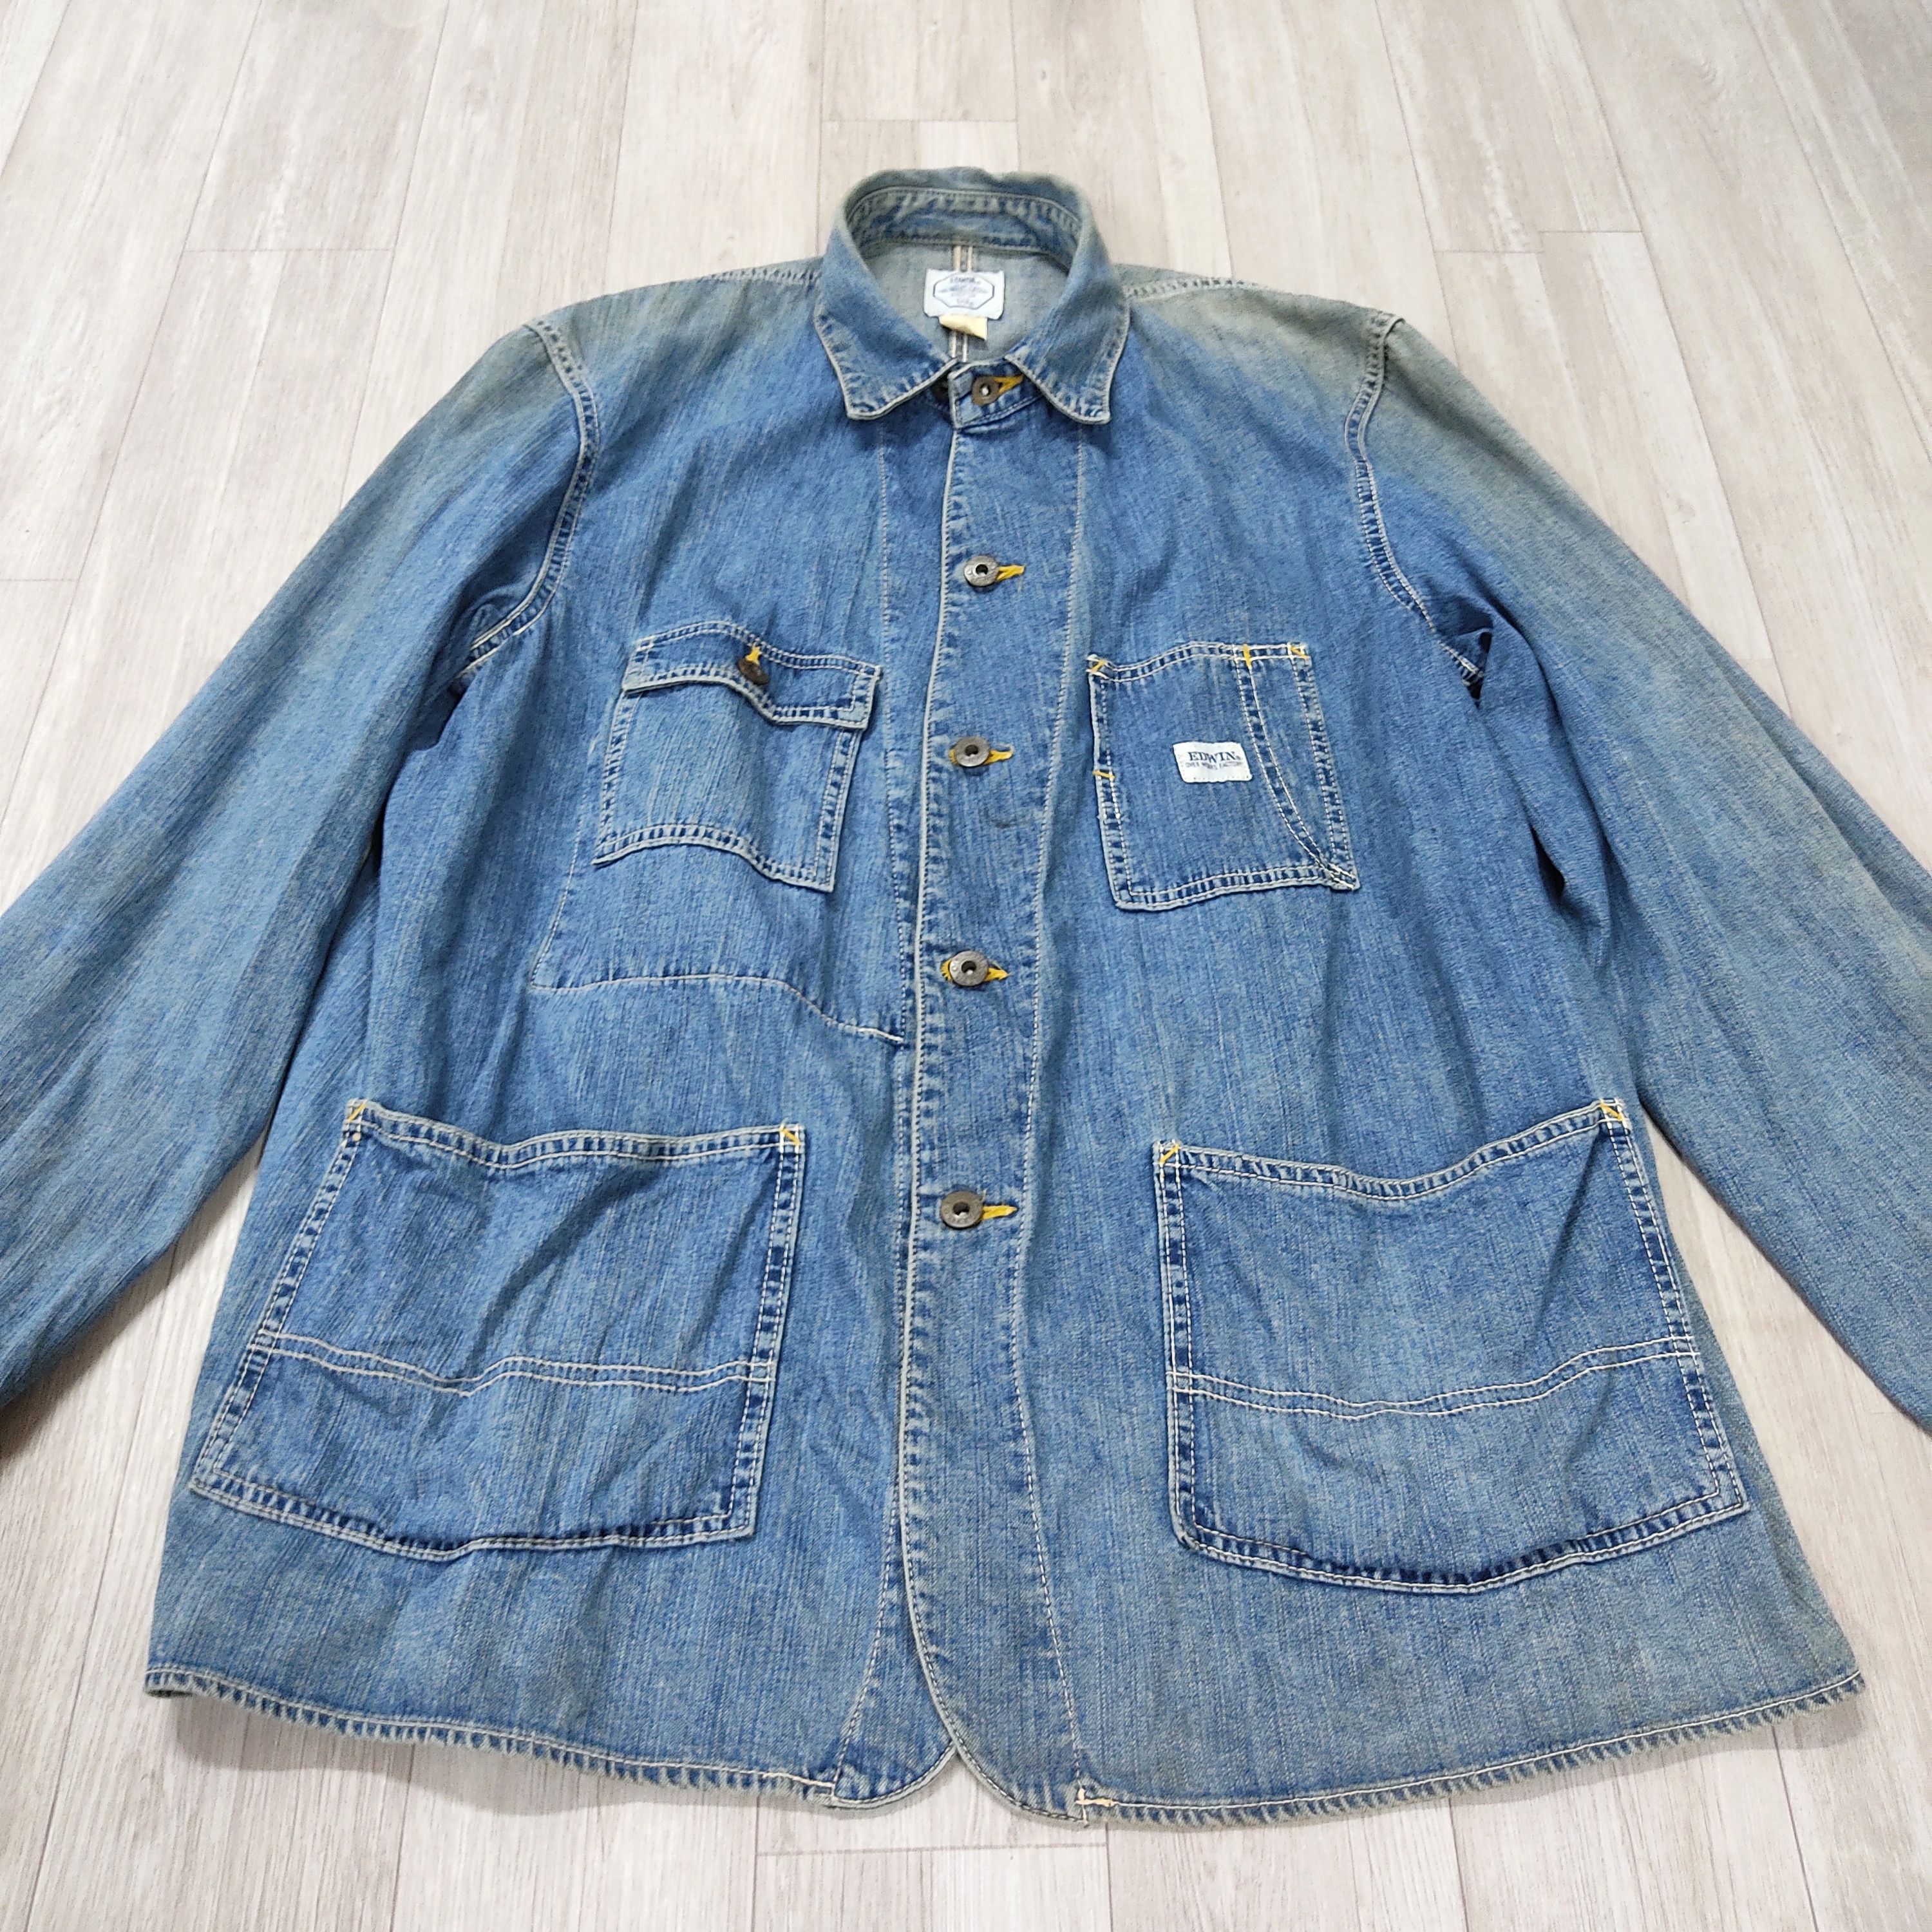 Vintage EDWIN Over Works Factory Chore Jacket - 6